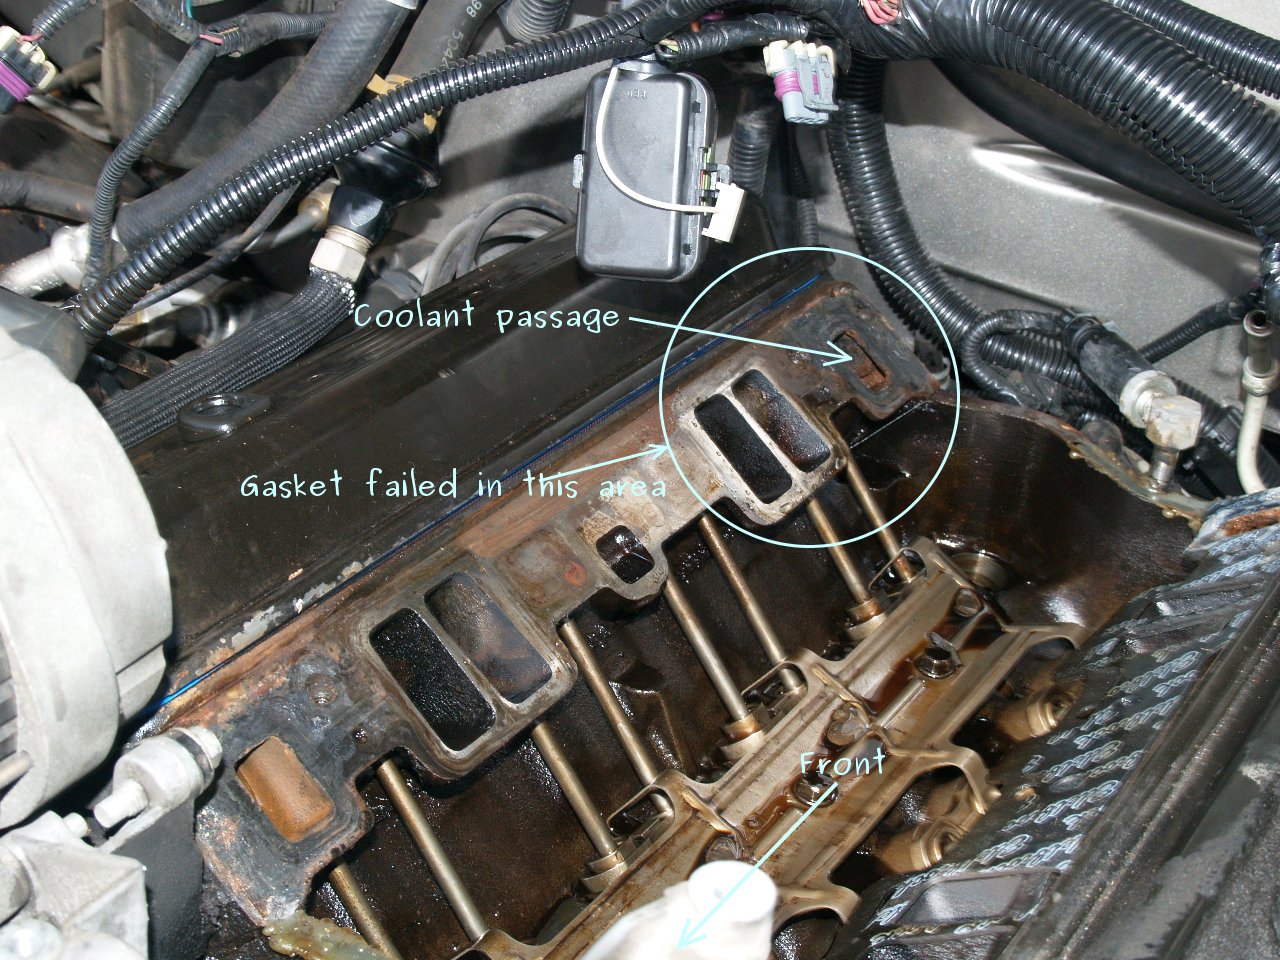 See P0B1B in engine